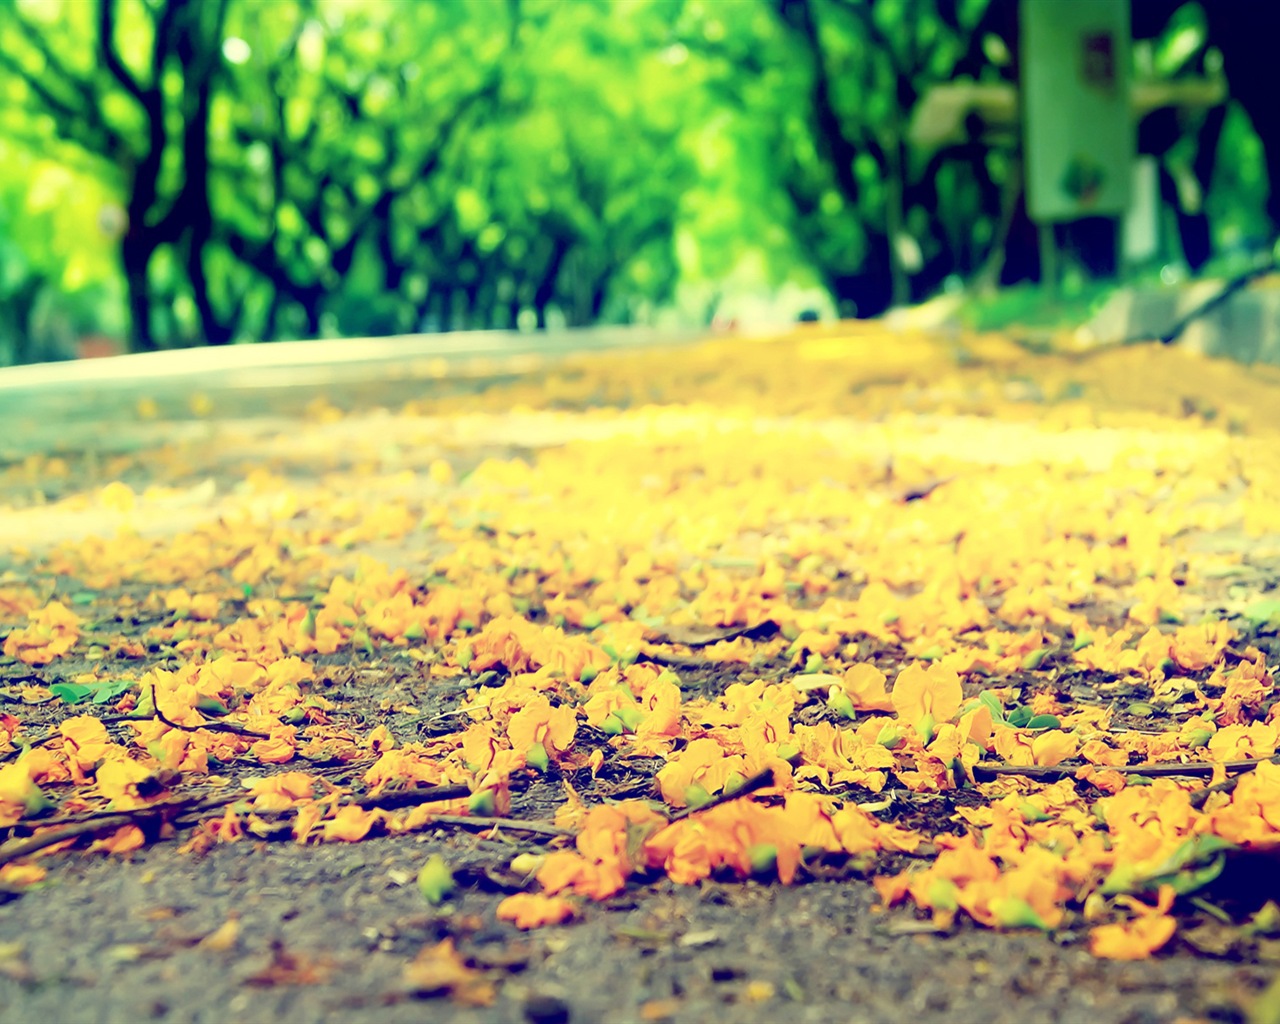 Flowers fall on ground, beautiful HD wallpapers #3 - 1280x1024